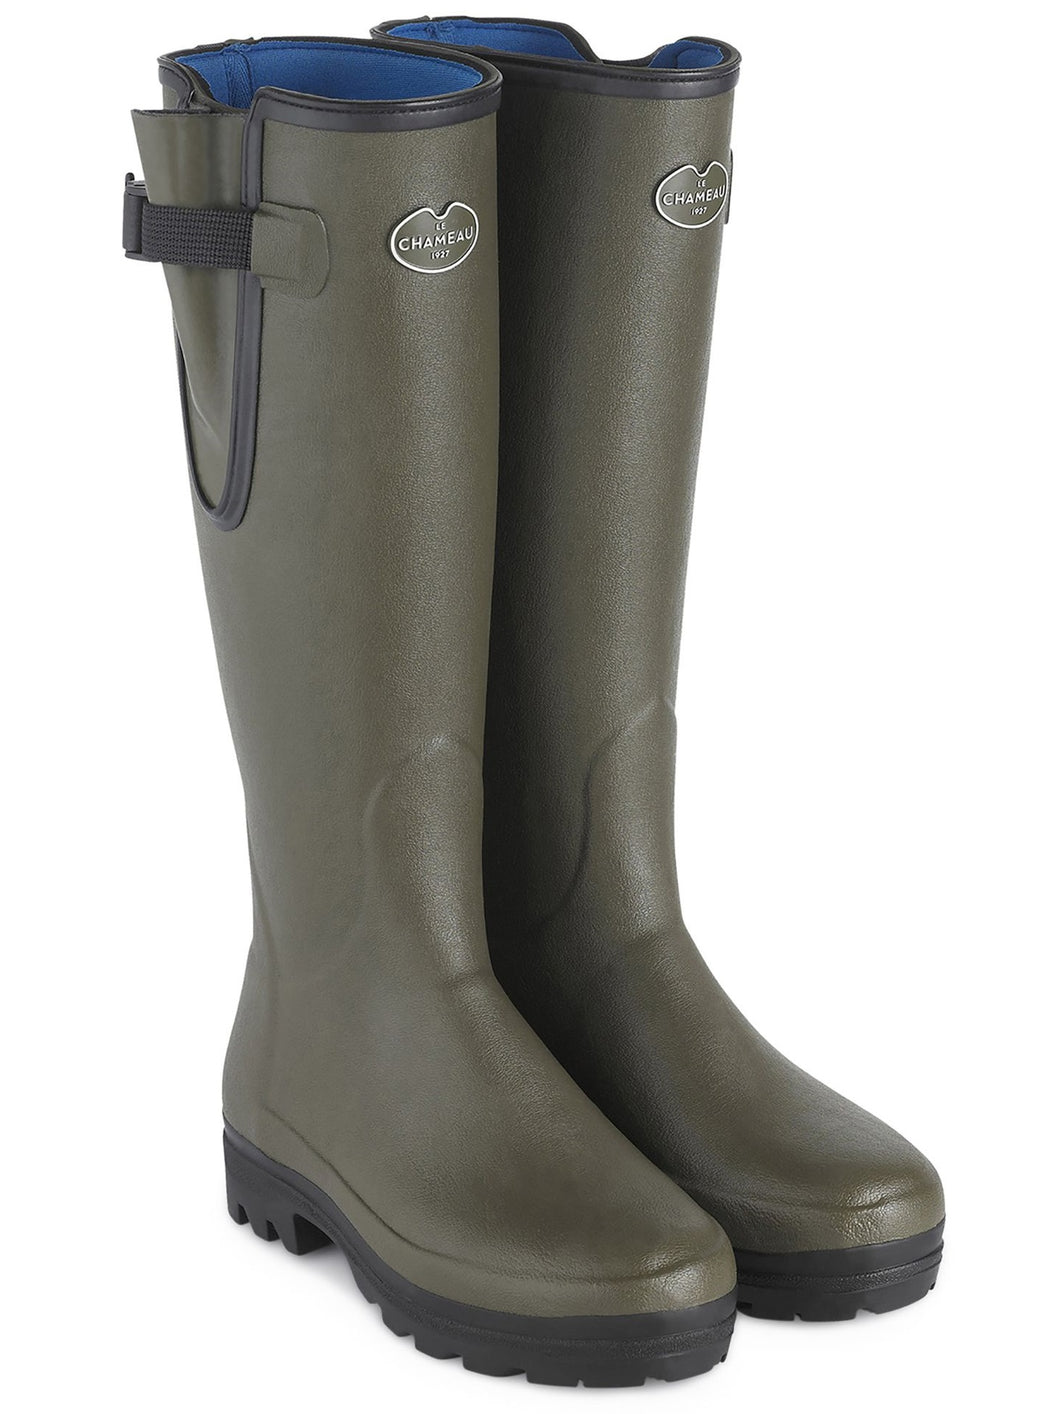 LE CHAMEAU Vierzonord Boots - Ladies Neoprene Lined - Dark Green